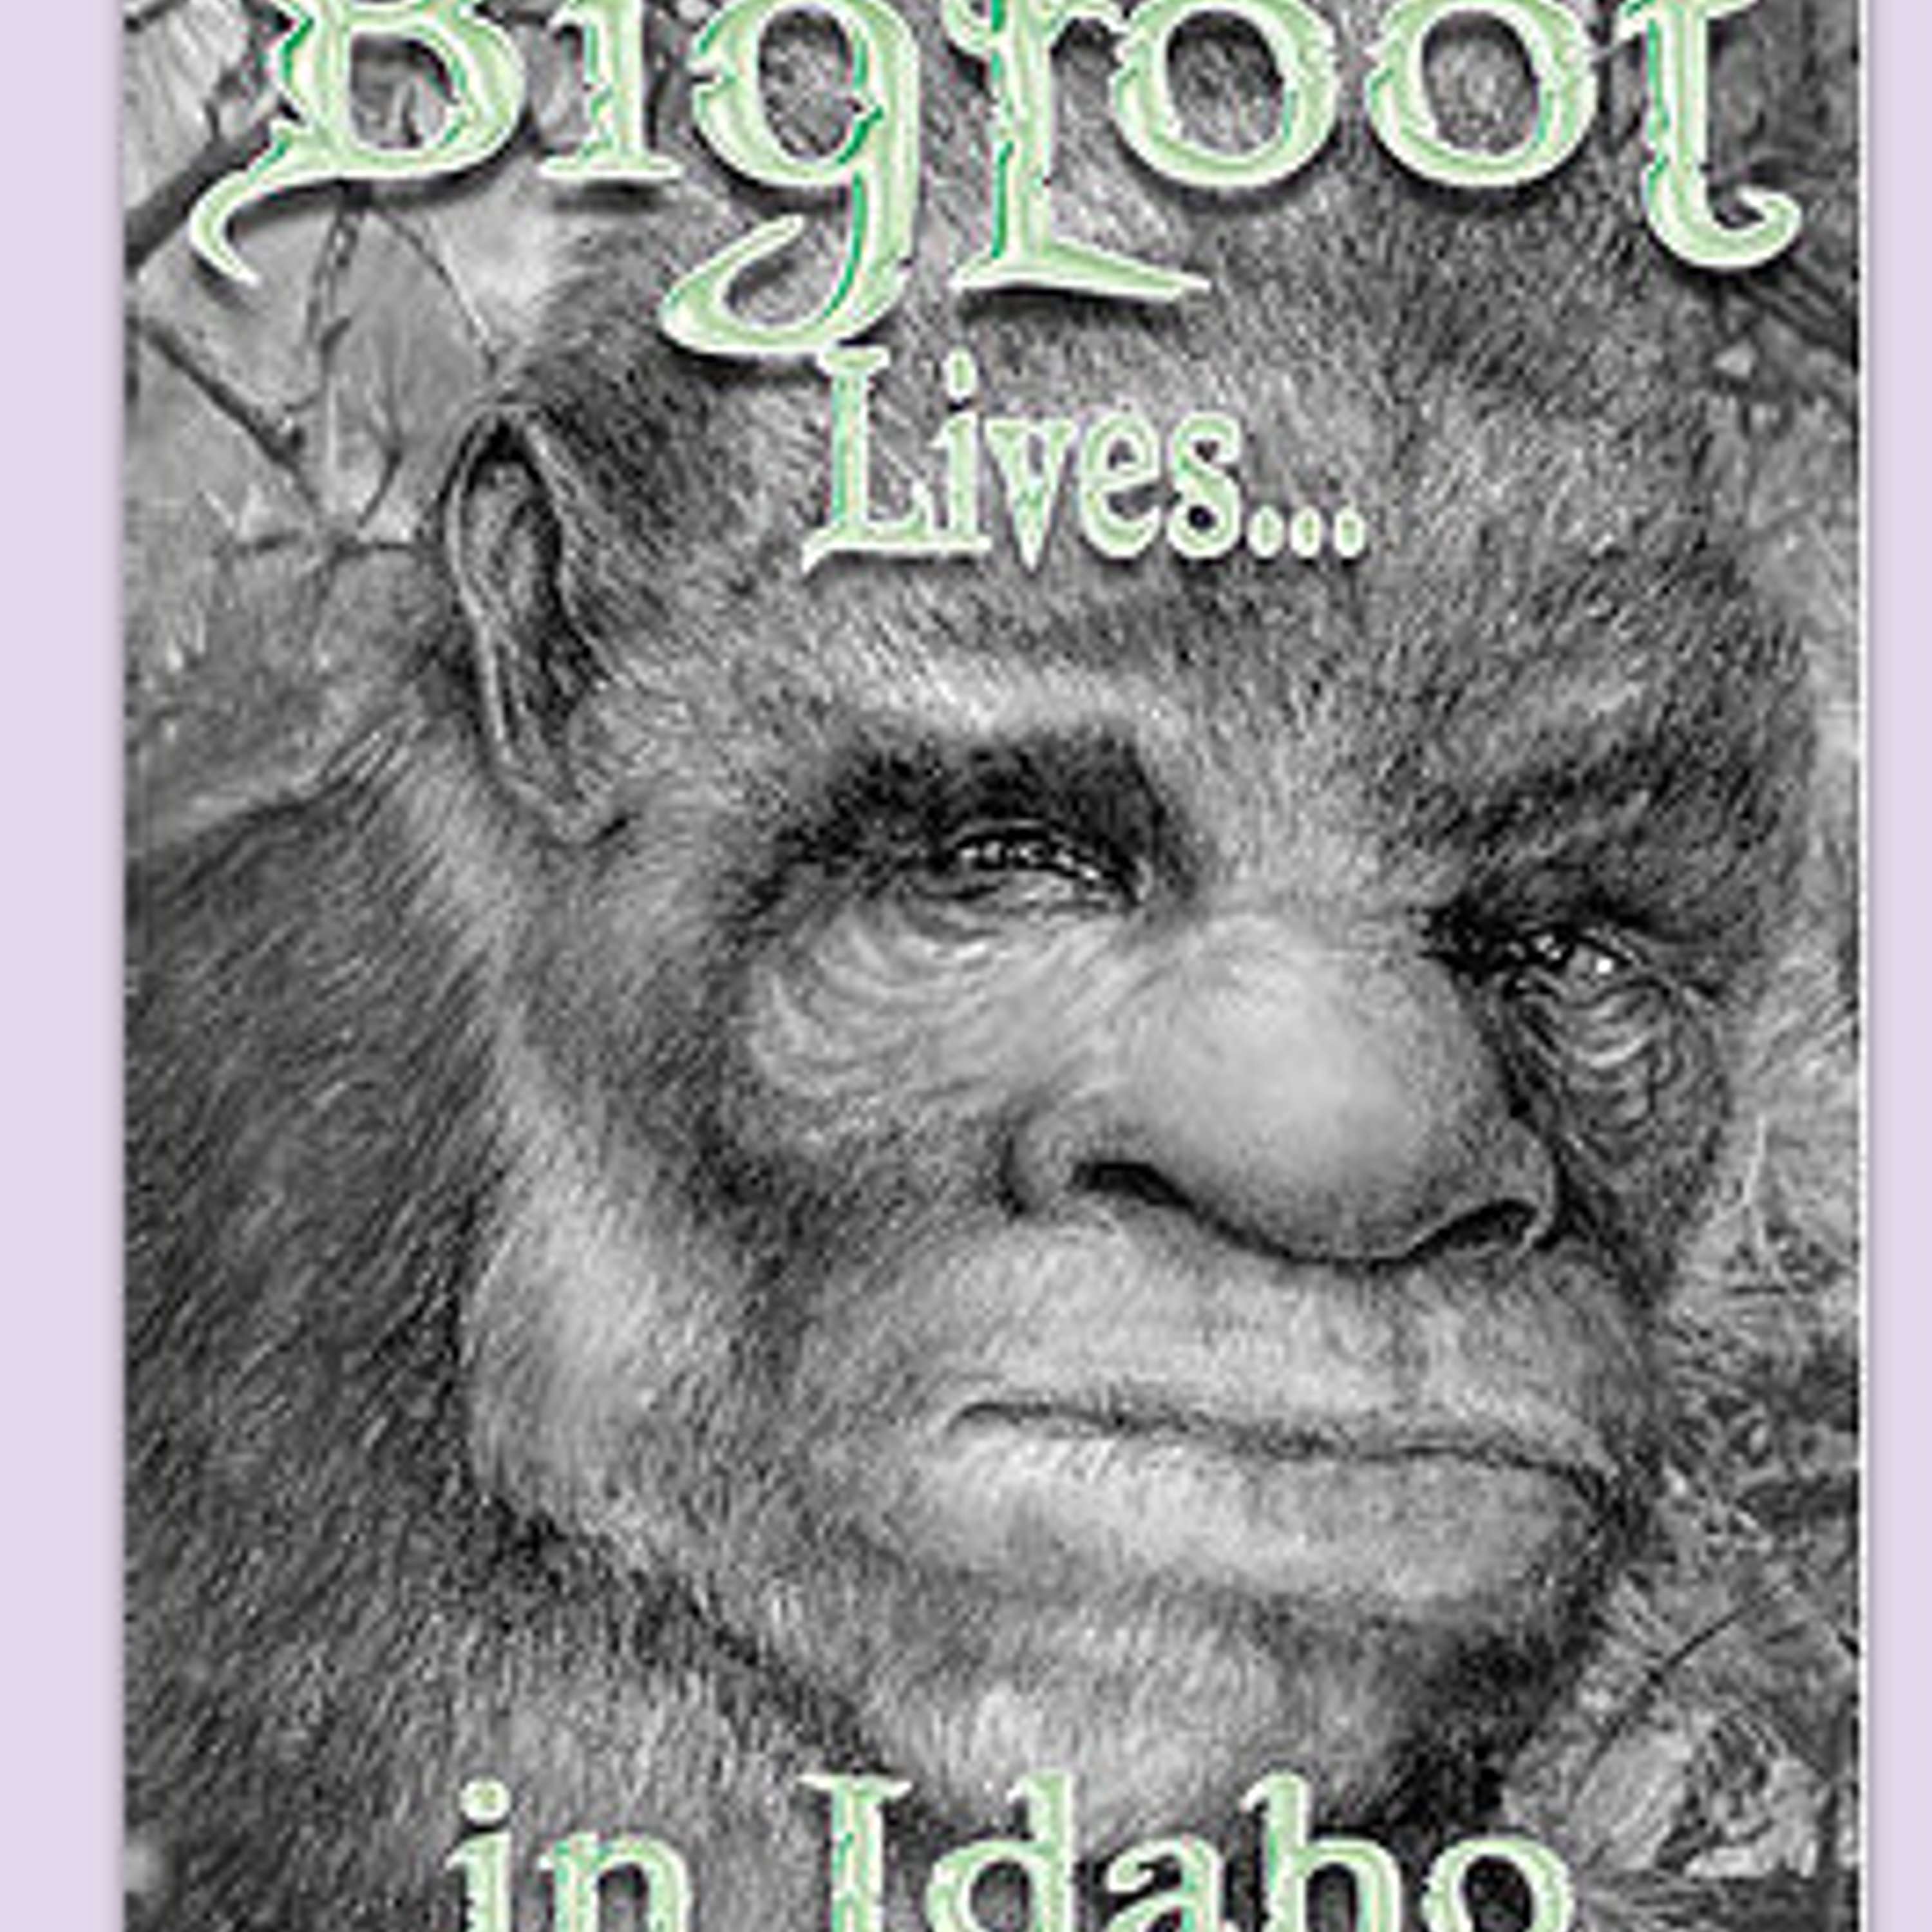 Bigfoot in Idaho with Special Guest Award-Winning Author Becky Cook: Part 2 of 3